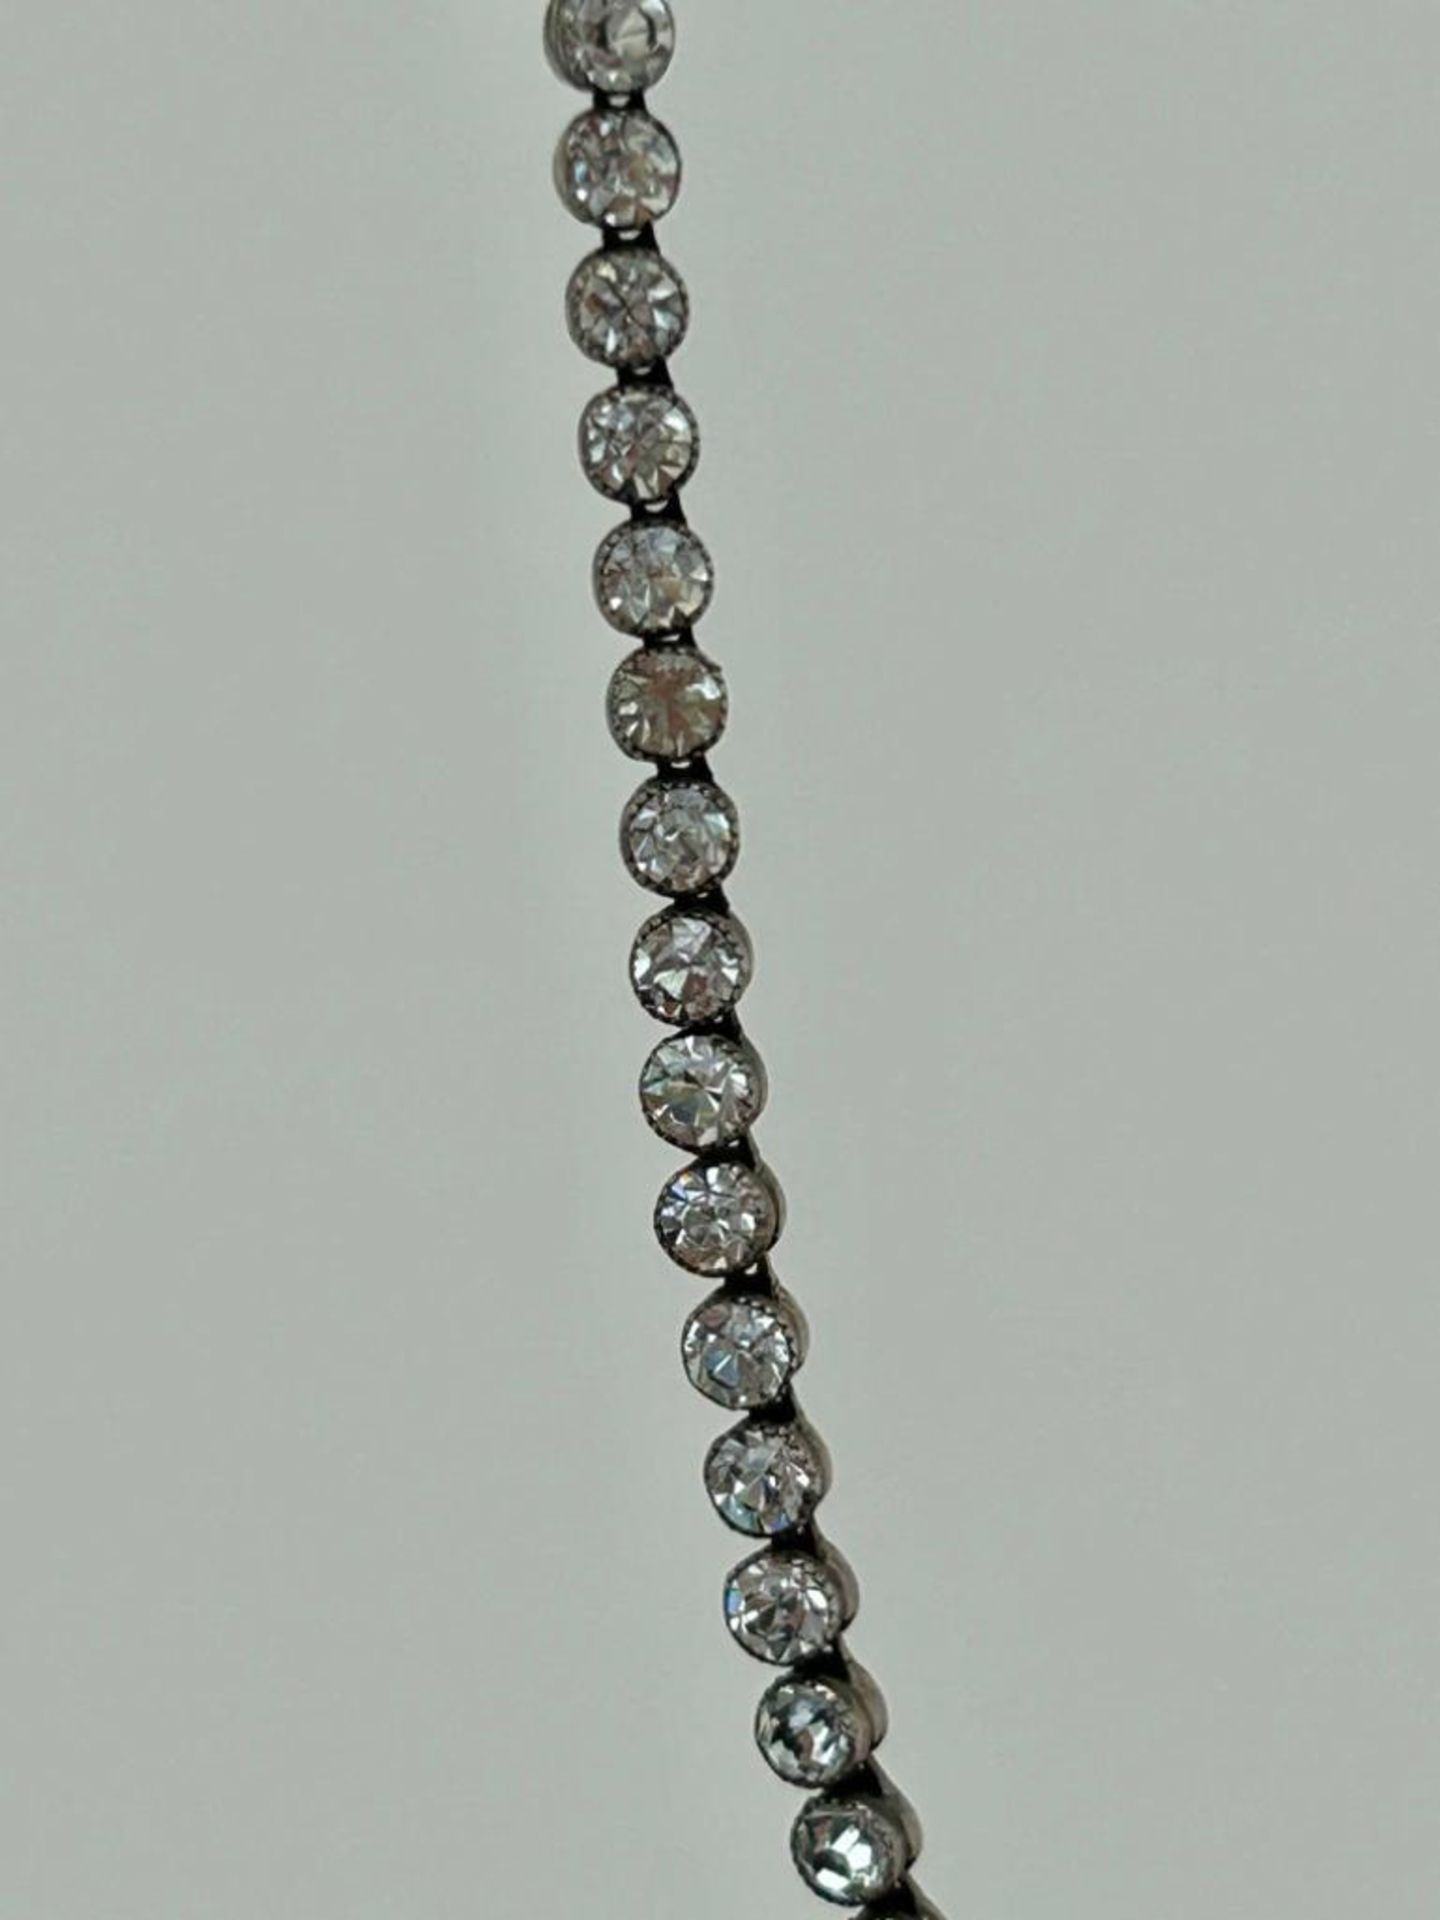 Wonderful Paste Riviere Necklace Silver - Image 2 of 6